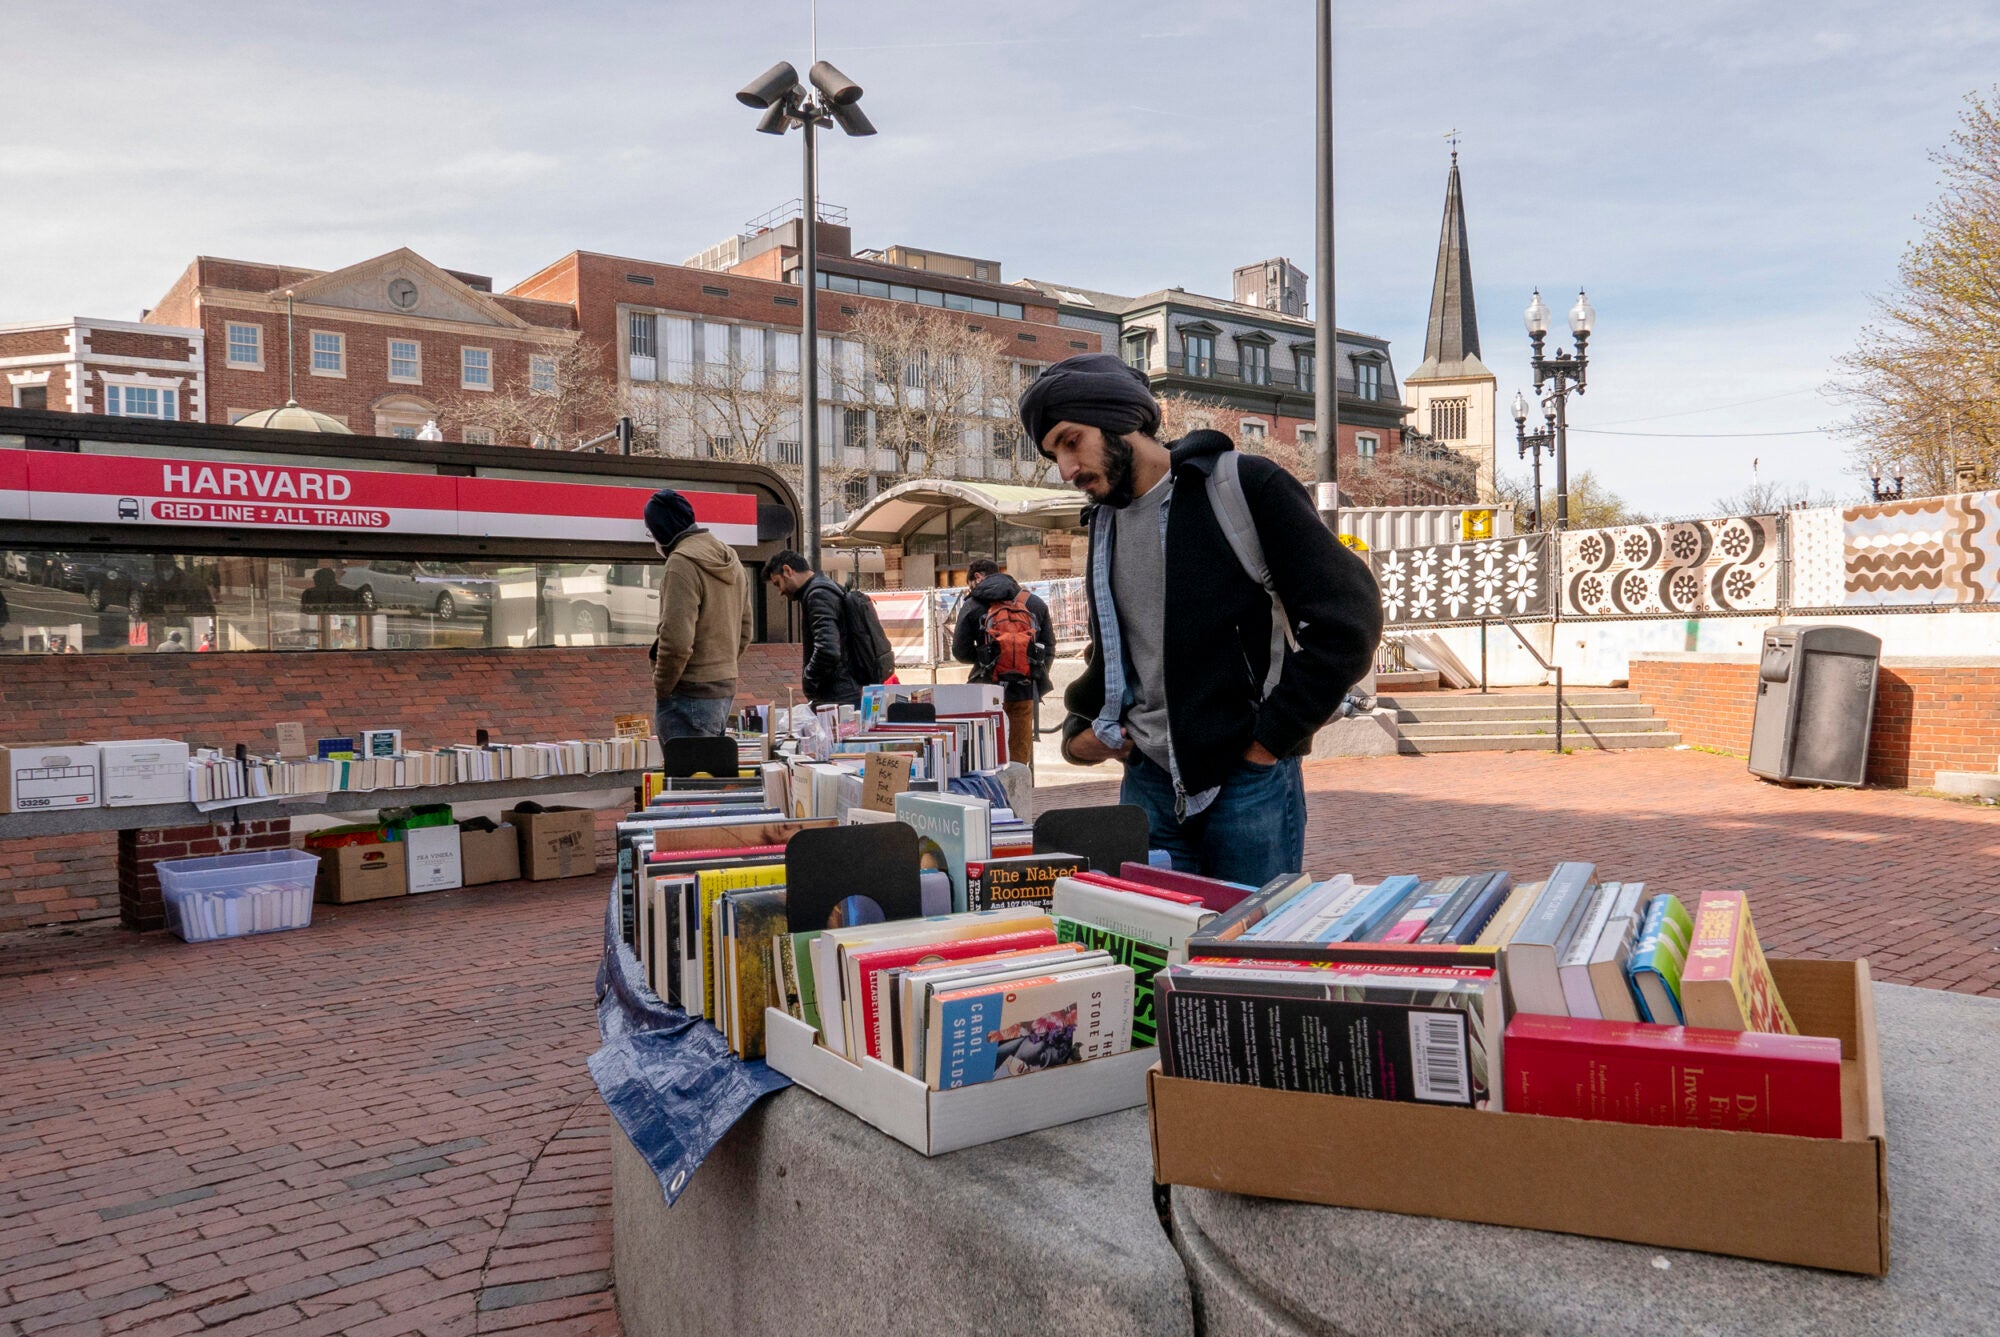 A man sorts through a box of books outside of a train stop